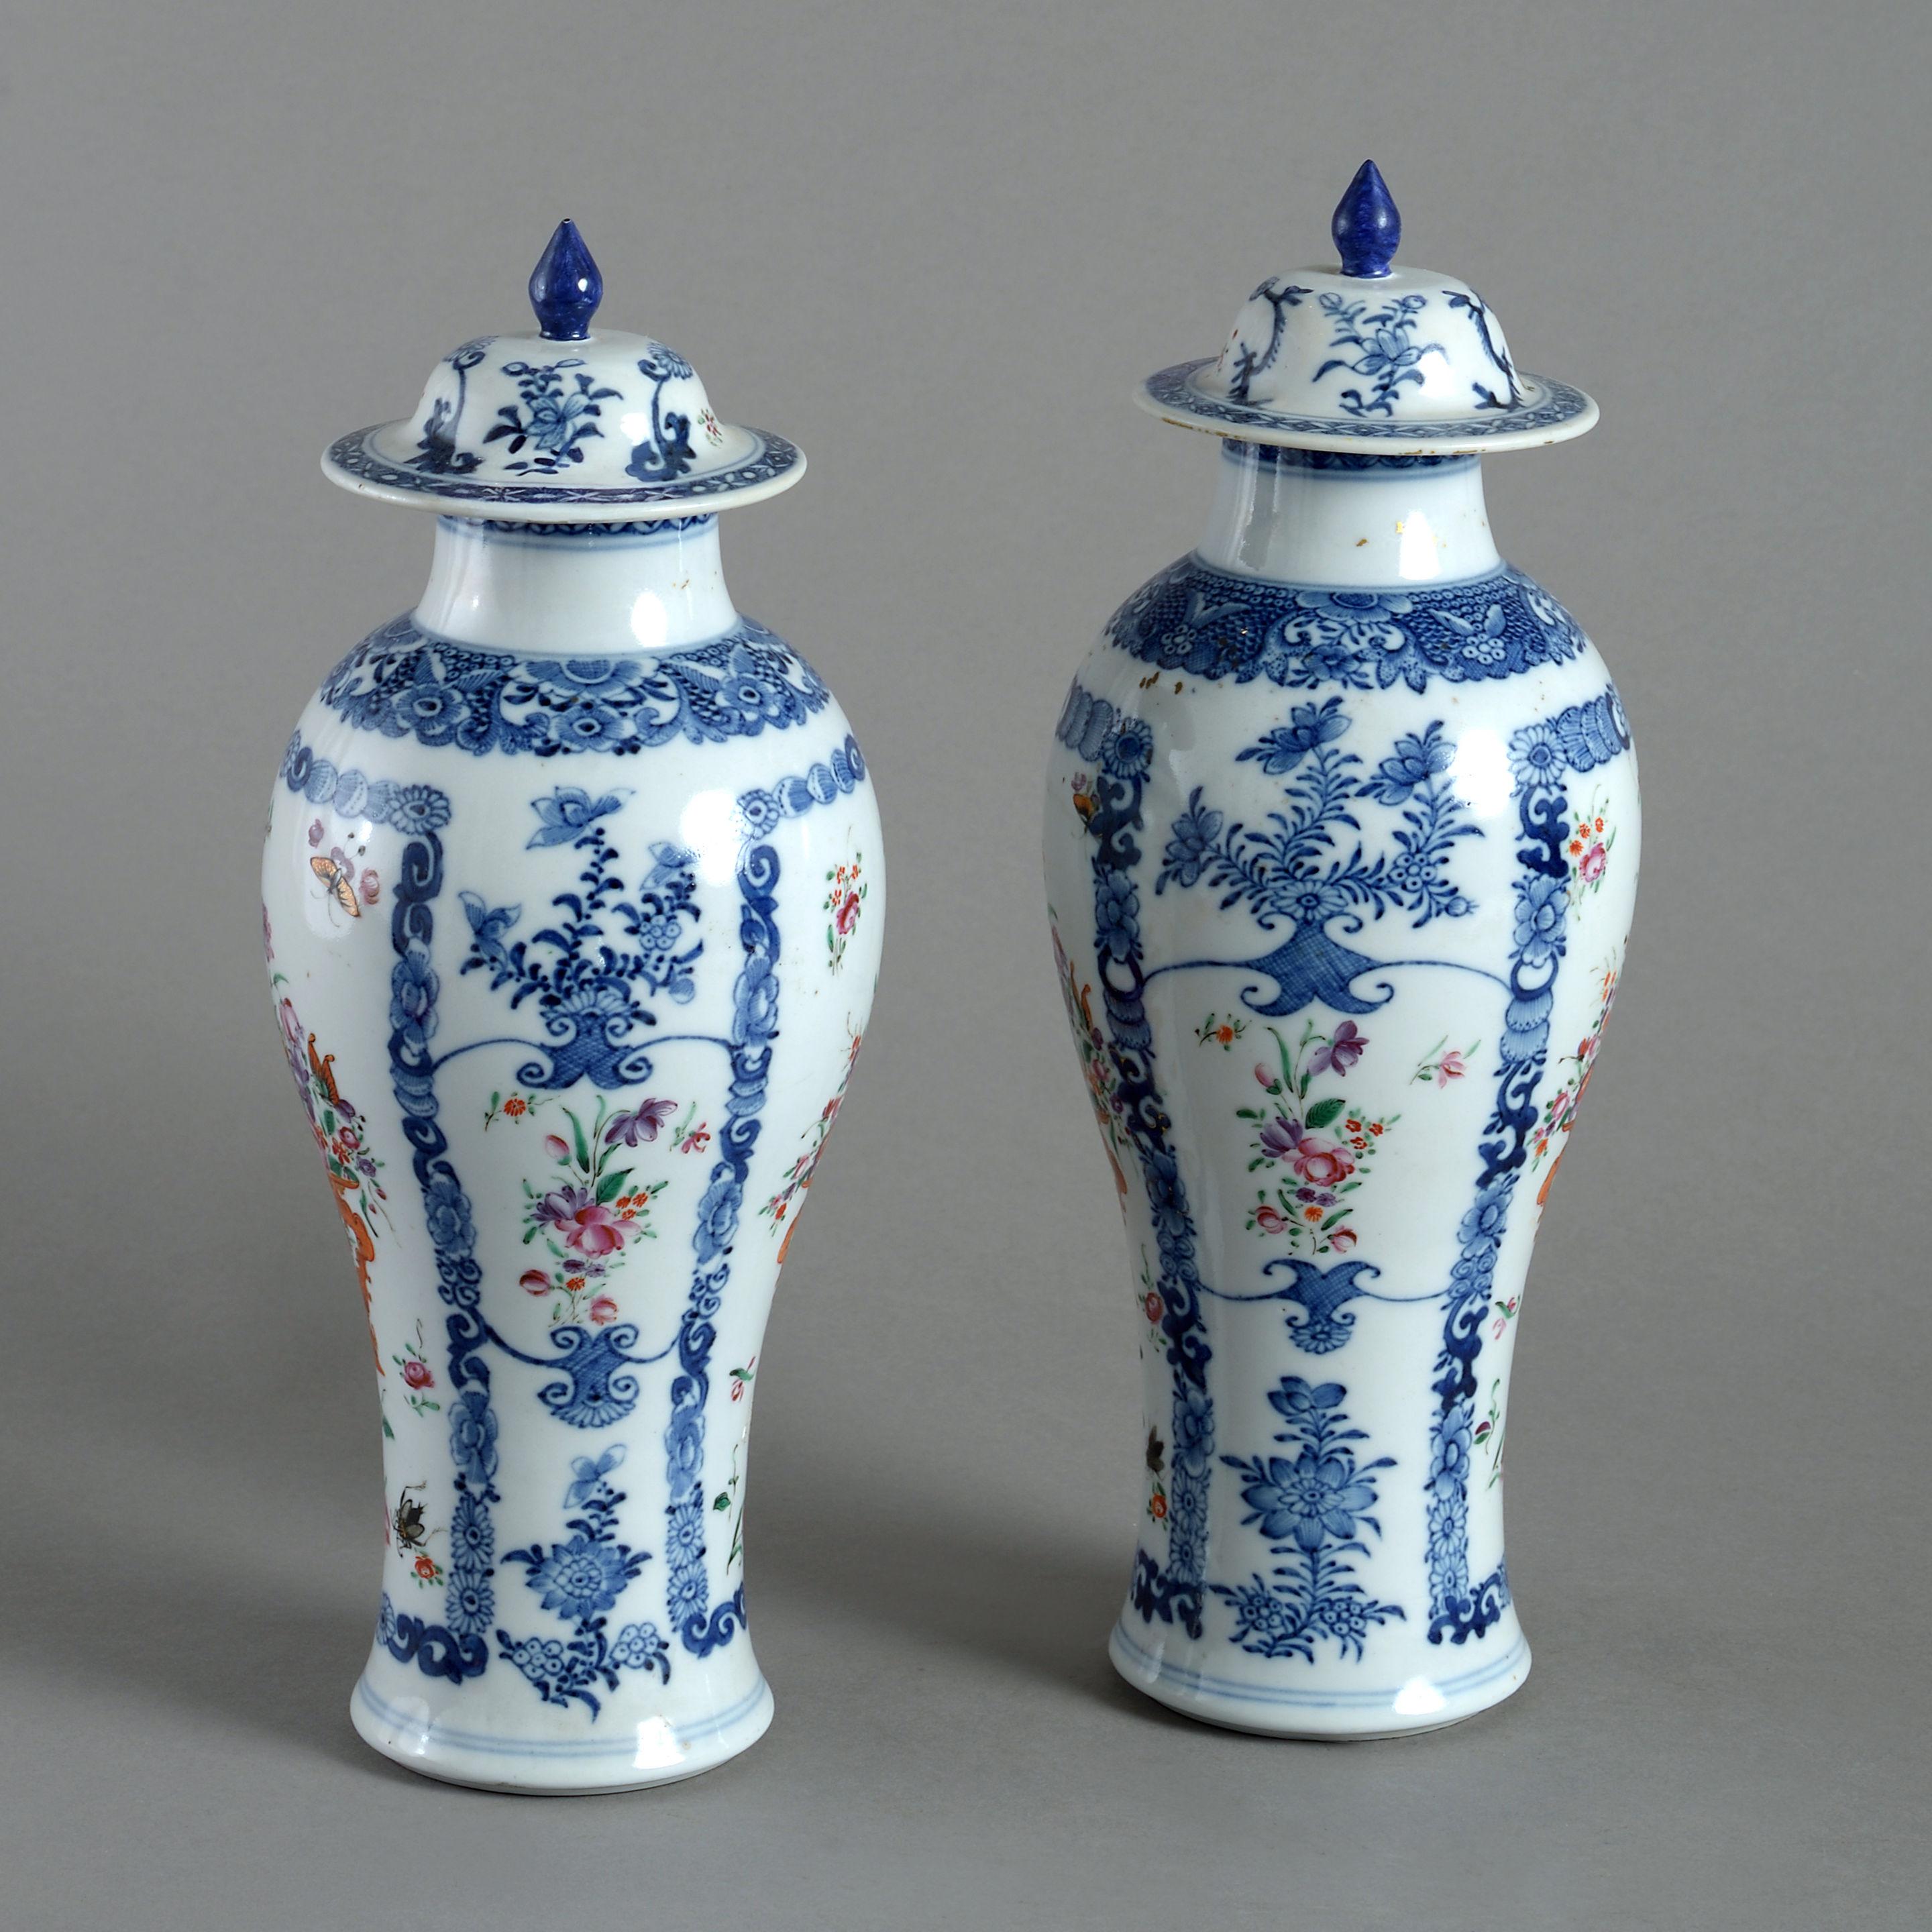 A fine pair of late 18th century porcelain vases and covers of baluster form, decorated with polychrome floral vignettes upon a white ground. 

Qing Dynasty, Qianlong Period